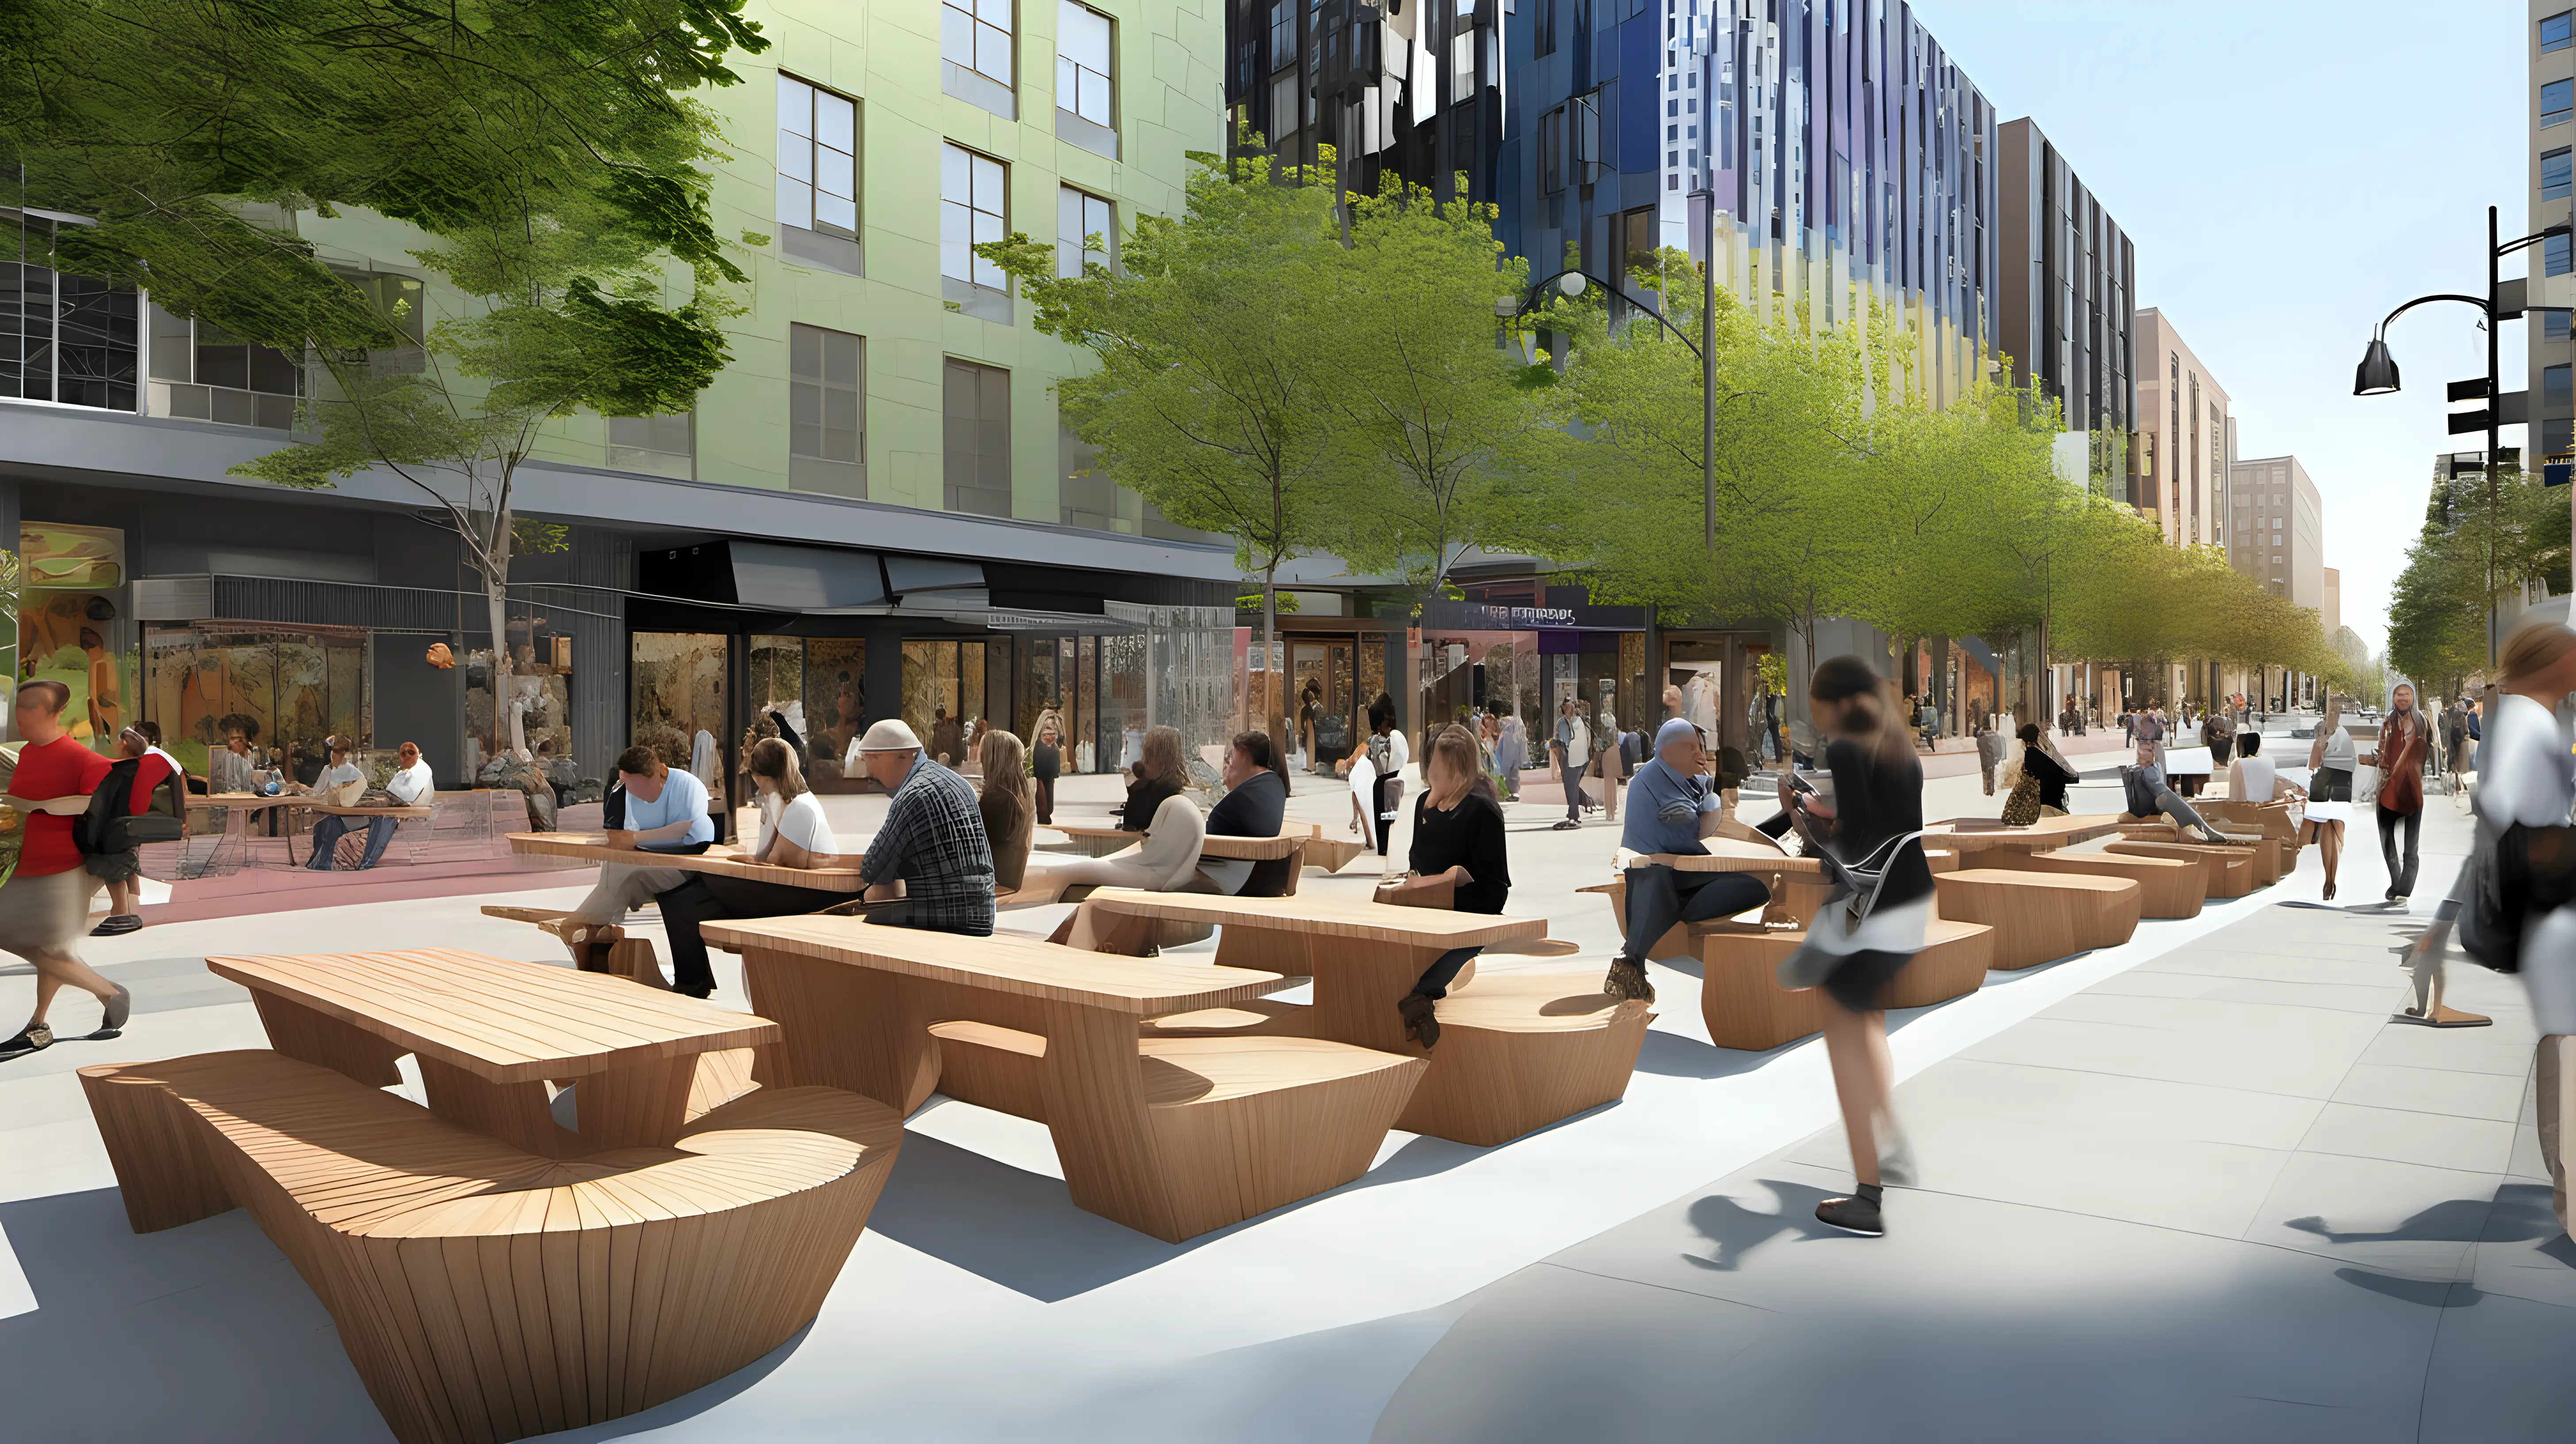 "Create a scene of a pedestrian-friendly street adorned with innovative public seating, outdoor cafes, and interactive sculptures, fostering a sense of community in a modern urban environment."